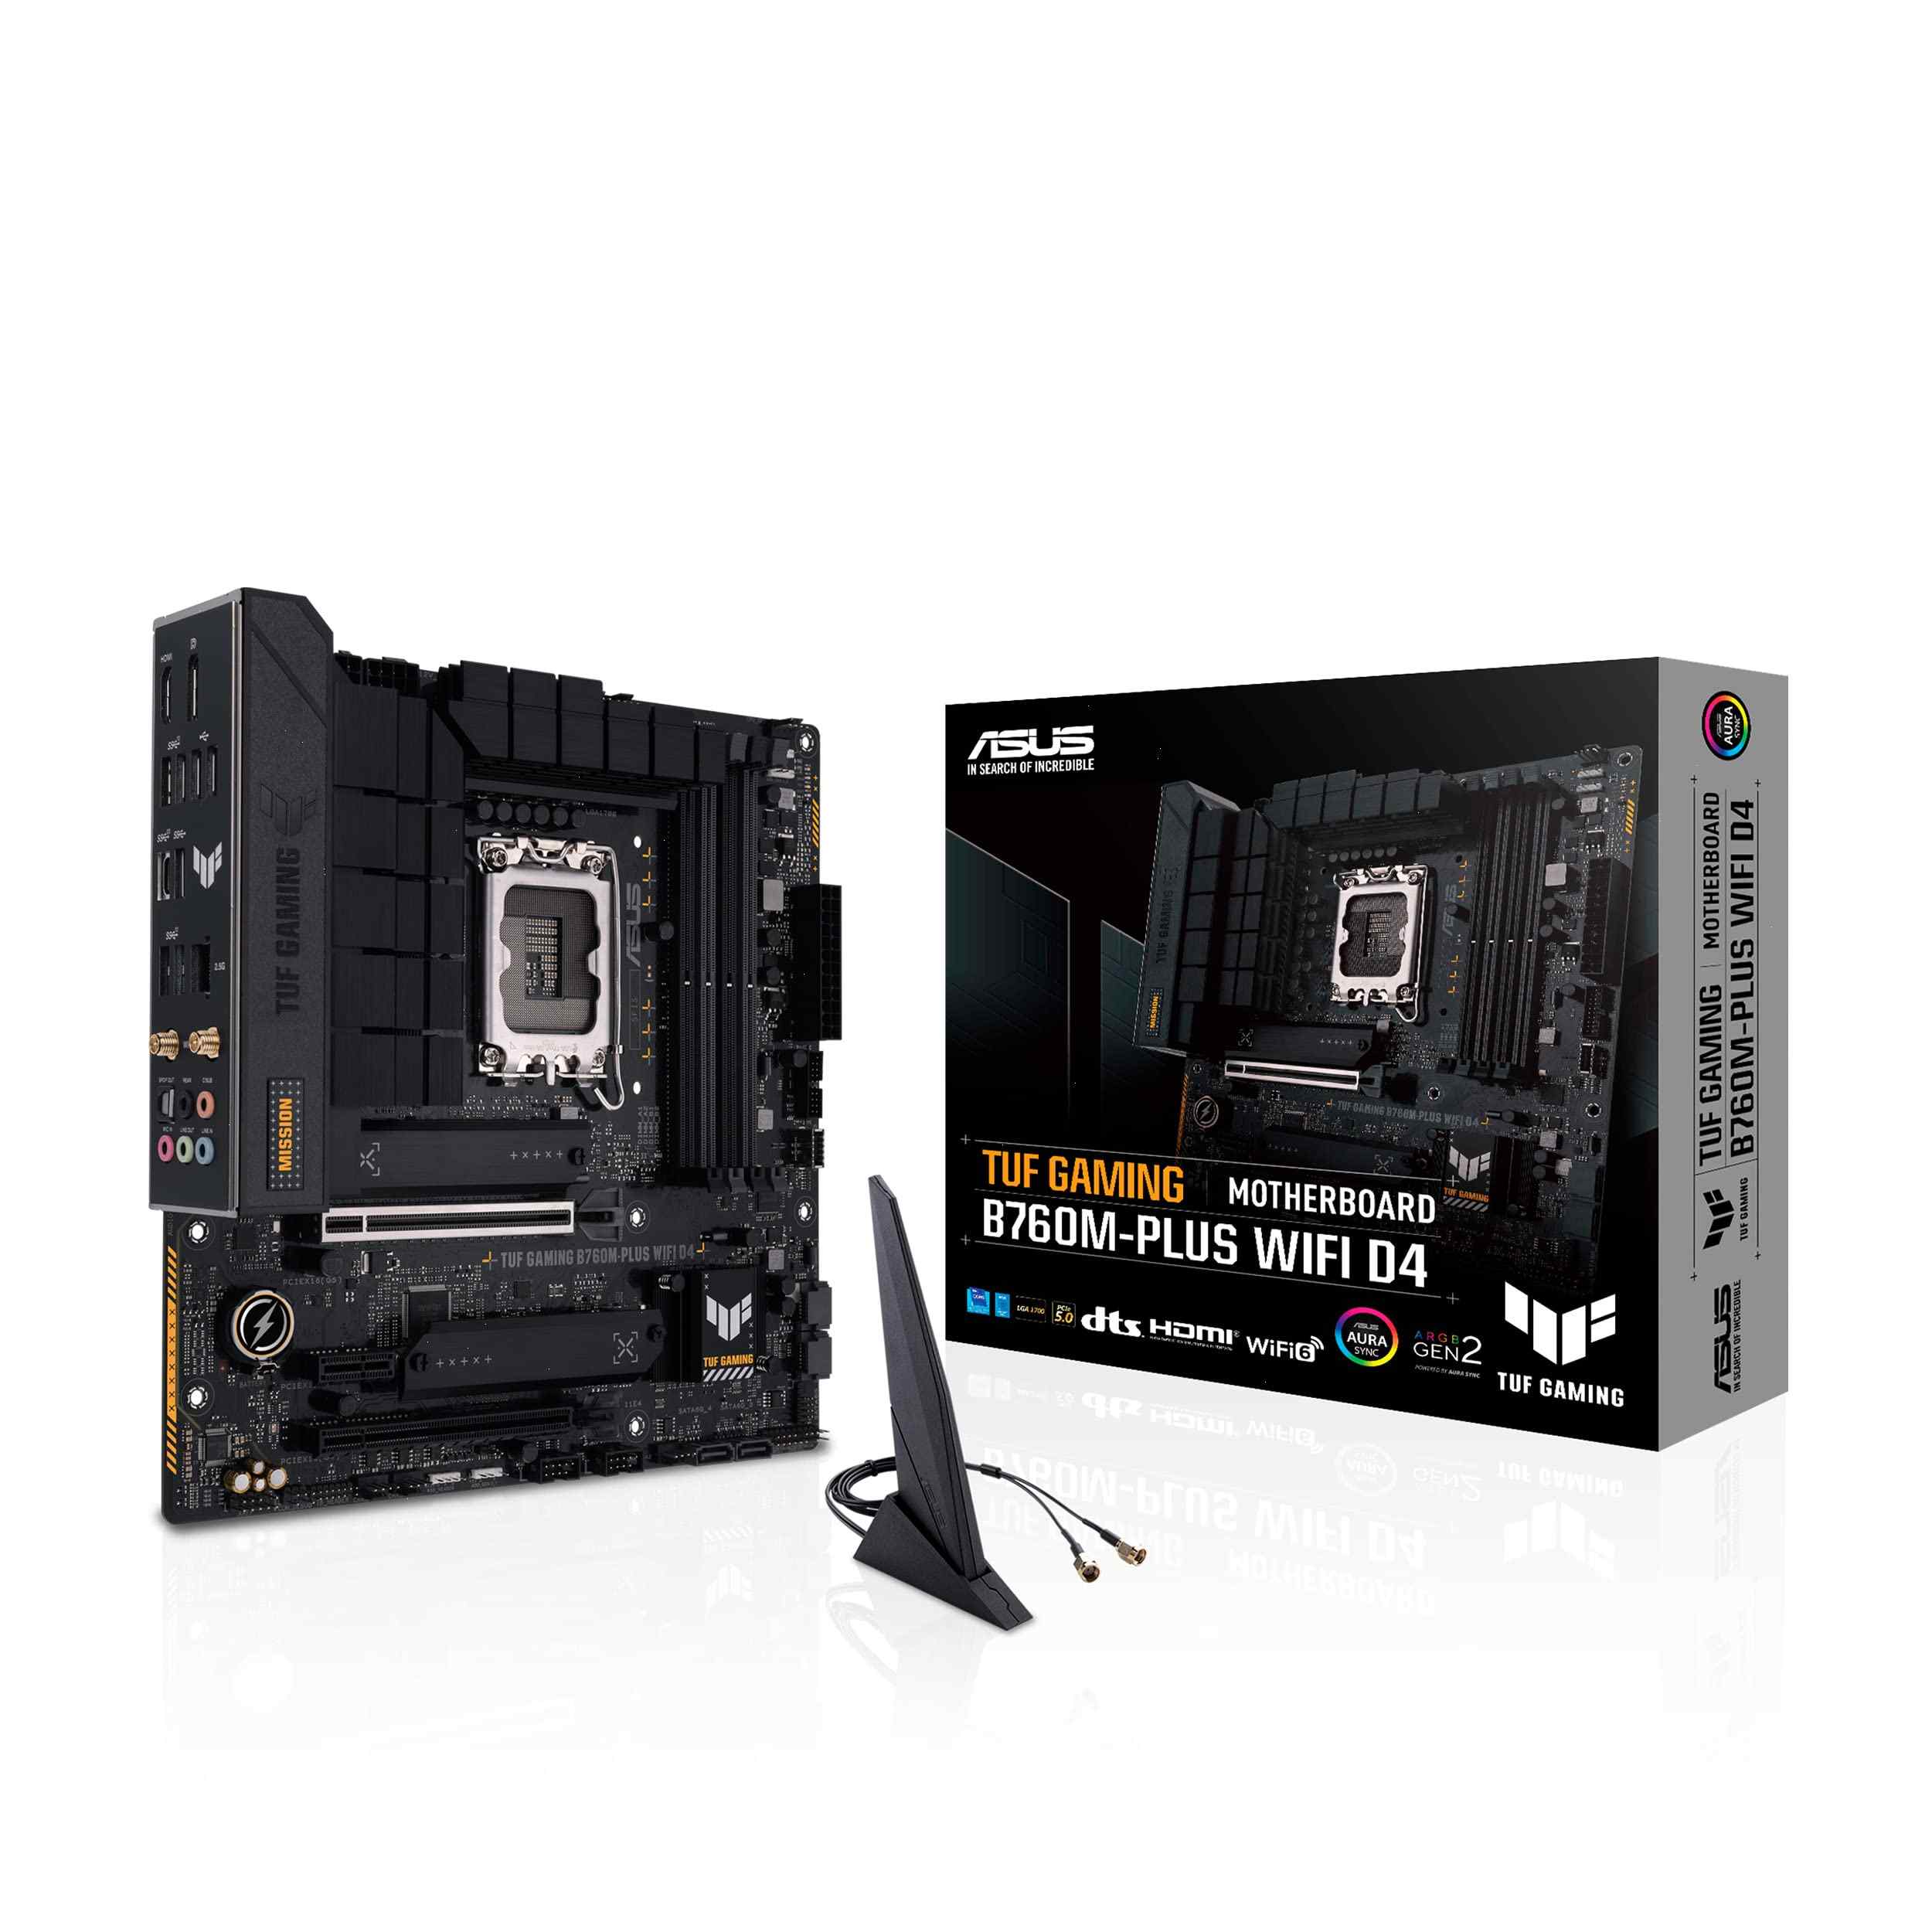 Unleashing Power and Potential: The ASUS TUF Gaming B760M-Plus WiFi D4 Motherboard